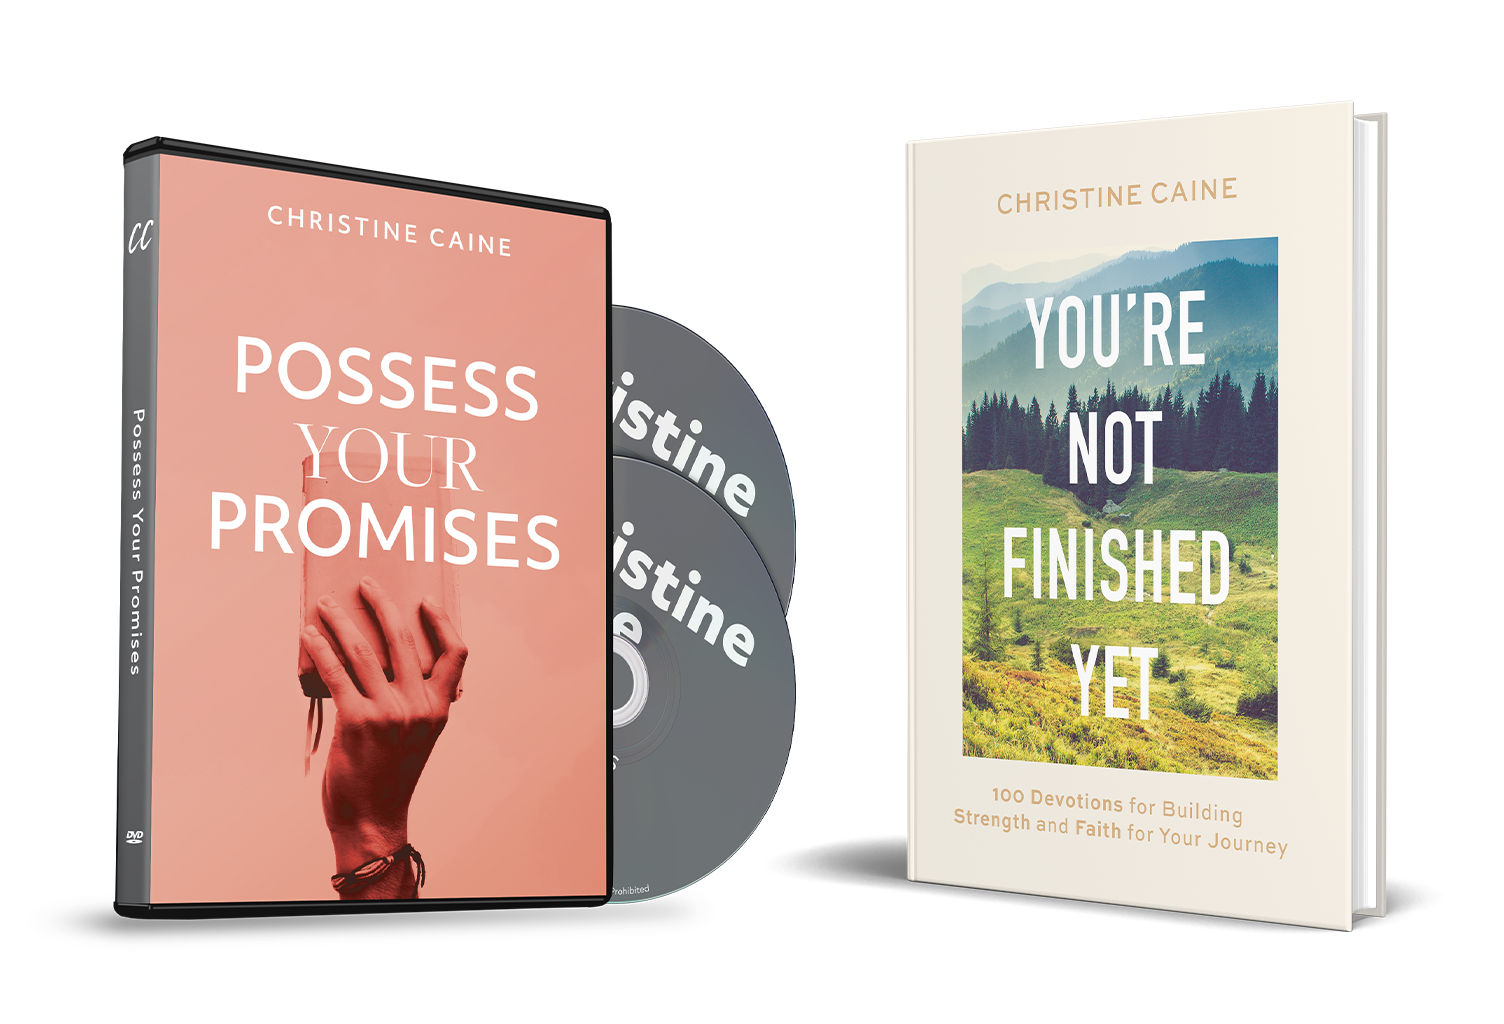 Possess Your Promises + You're Not Finished Yet by Christine Caine by TBN